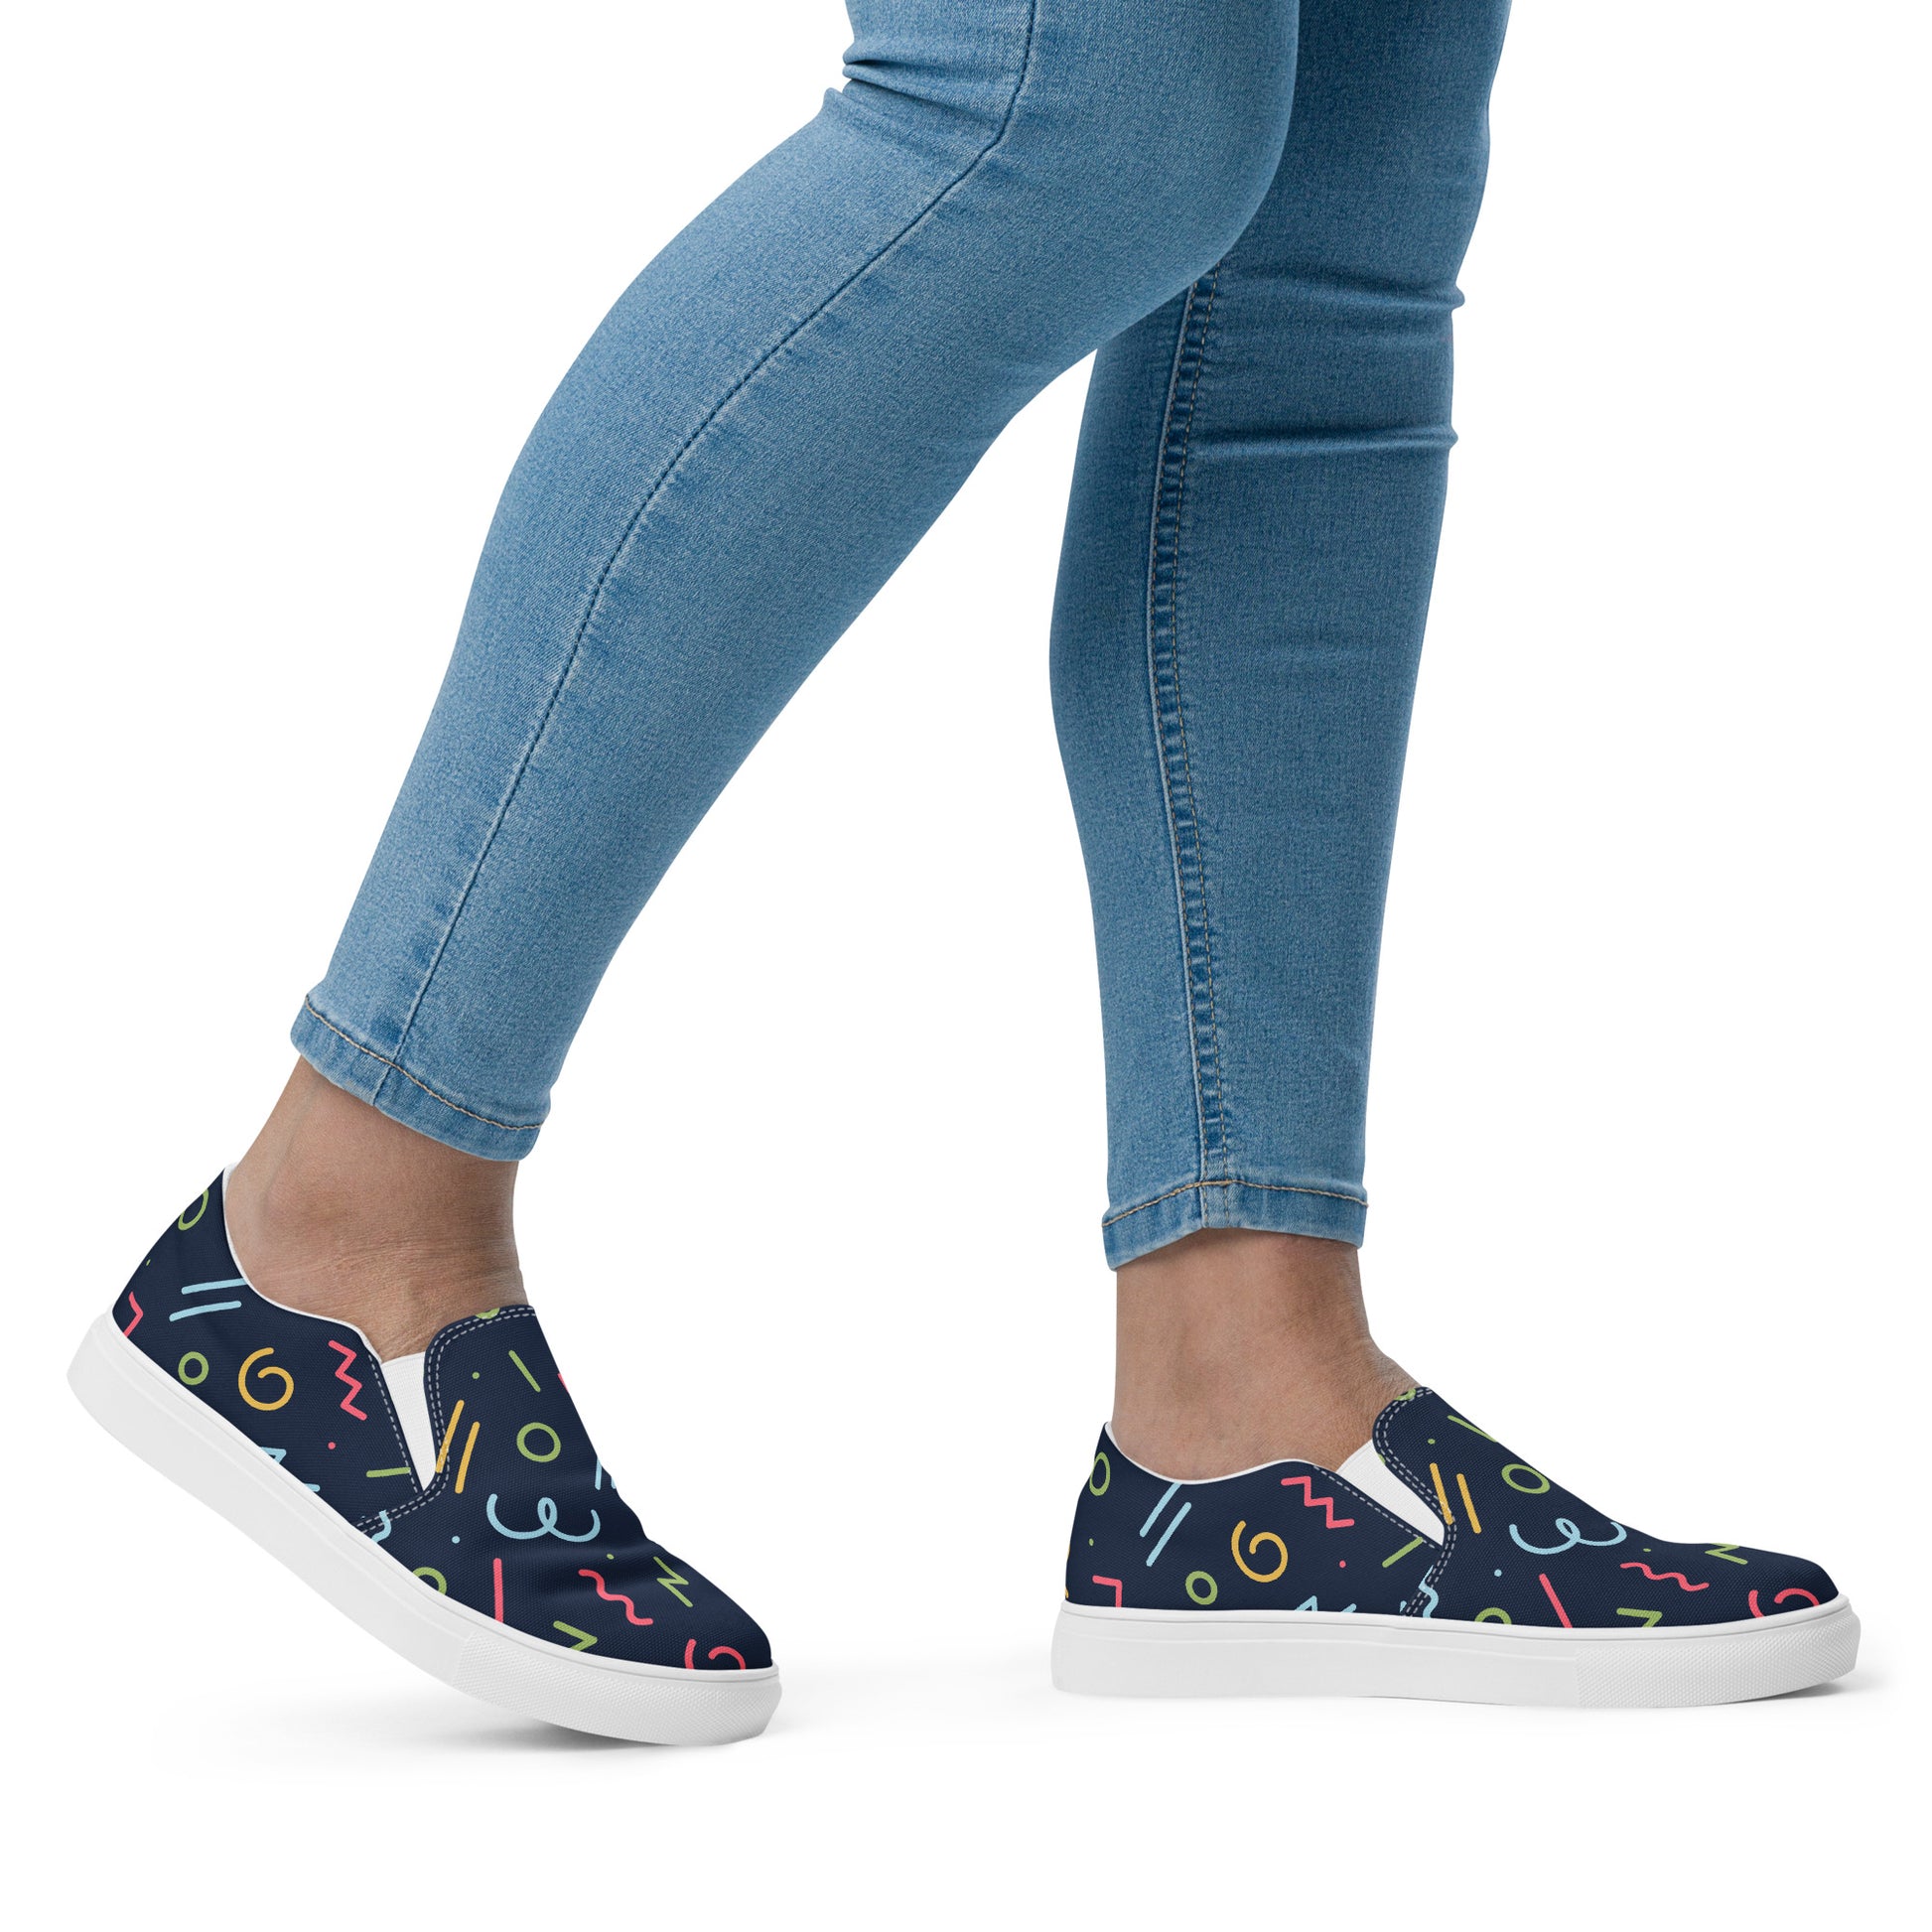 Squiggles - Women’s slip-on canvas shoes Womens Slip On Shoes